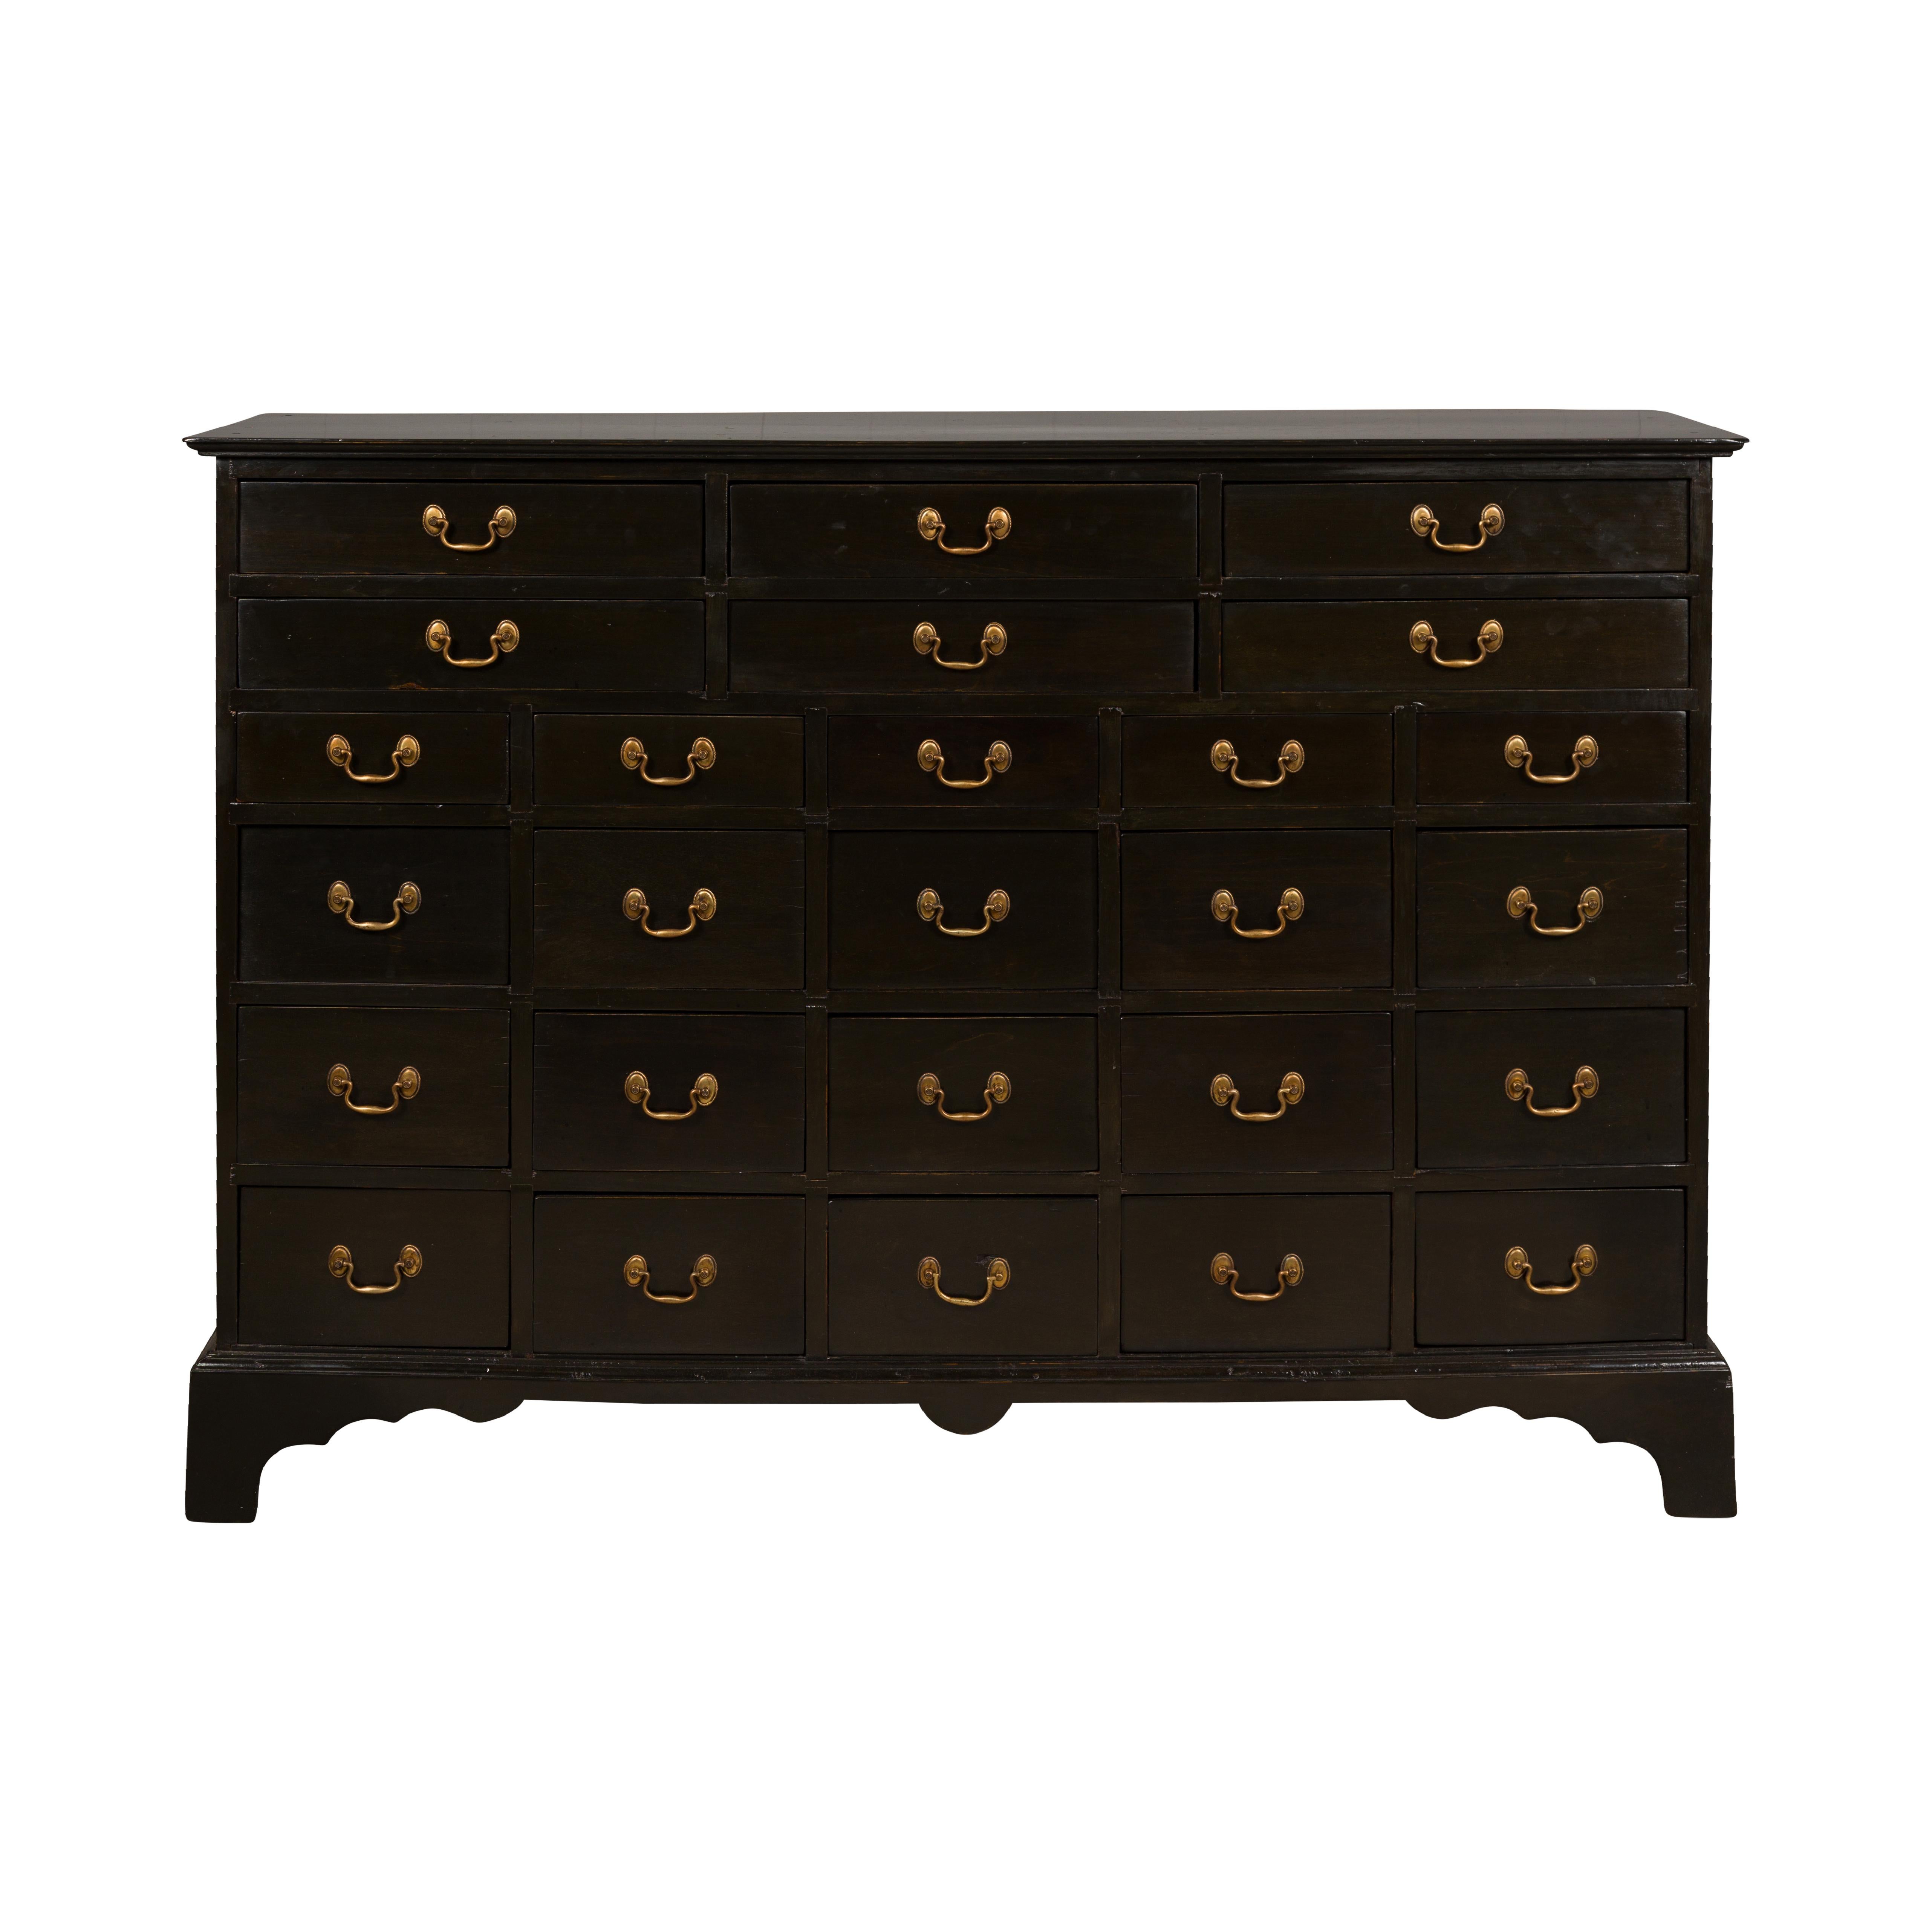 English 19th Century Black Apothecary Chest with 26 Drawers and Brass Hardware In Good Condition For Sale In Atlanta, GA